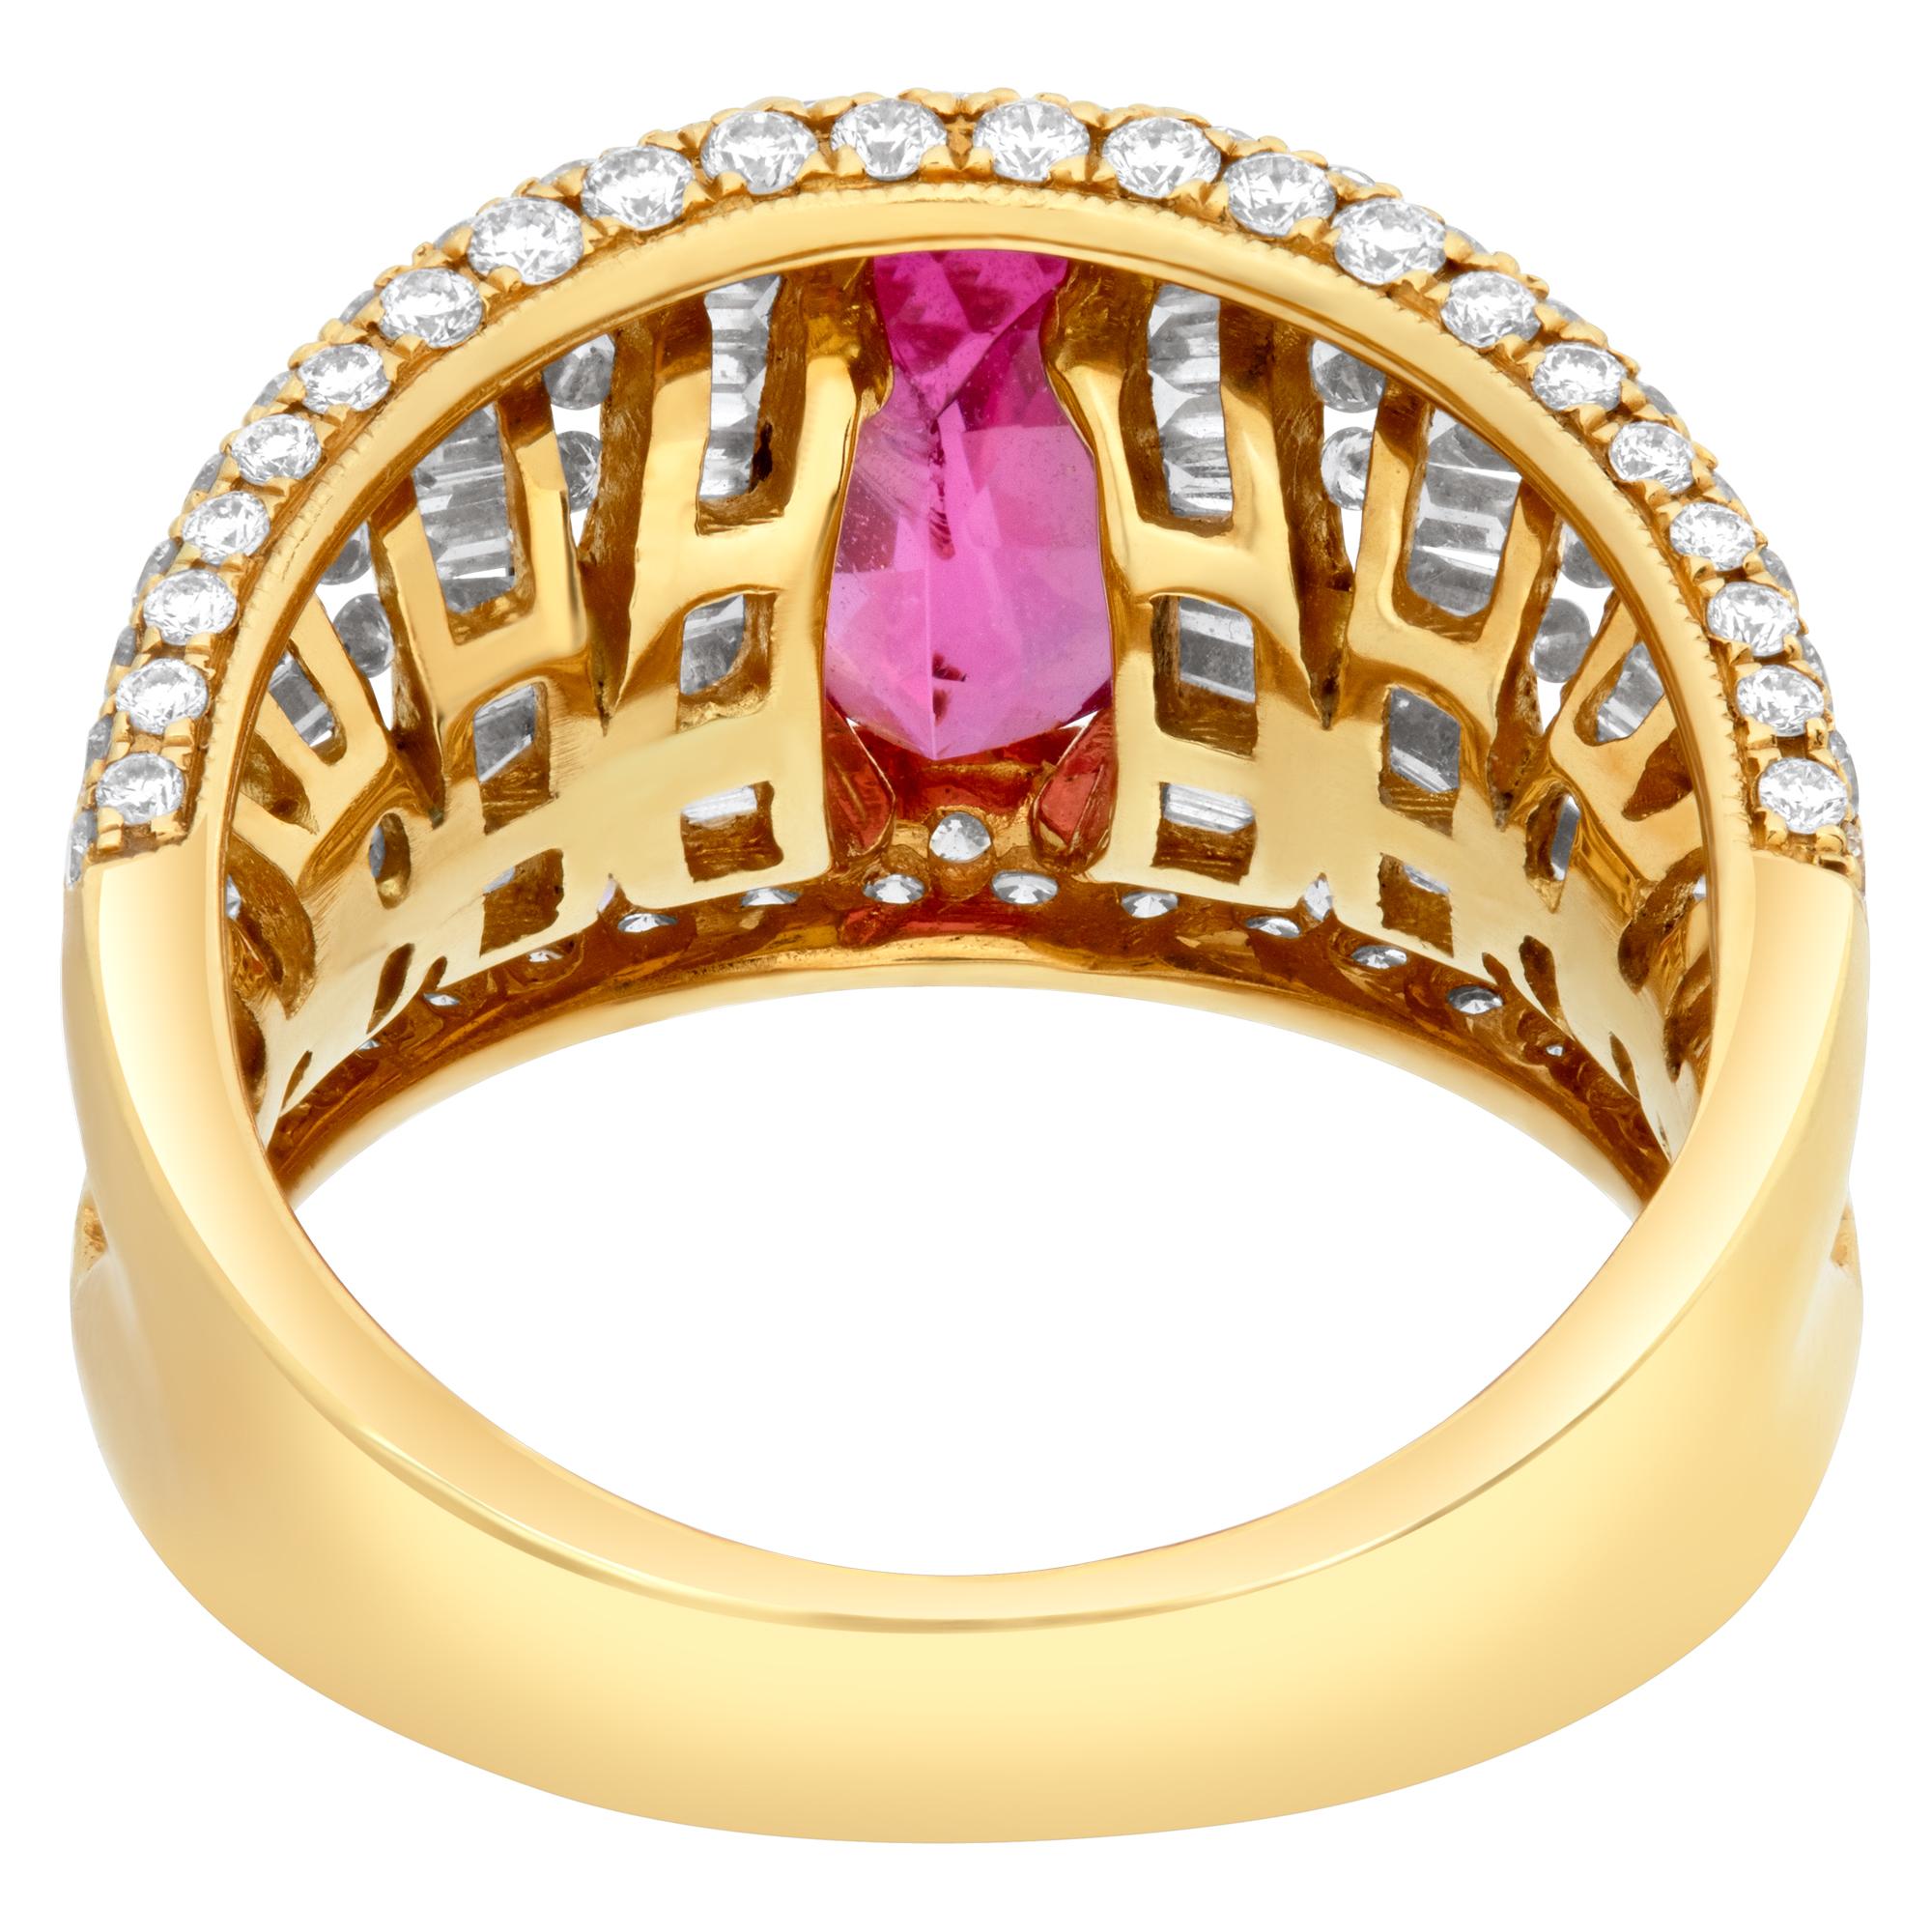 Women's 18k Yellow Gold Ring with Oval Brilliant Cut Pink Spinel '2.73 Carats' & Diamond For Sale